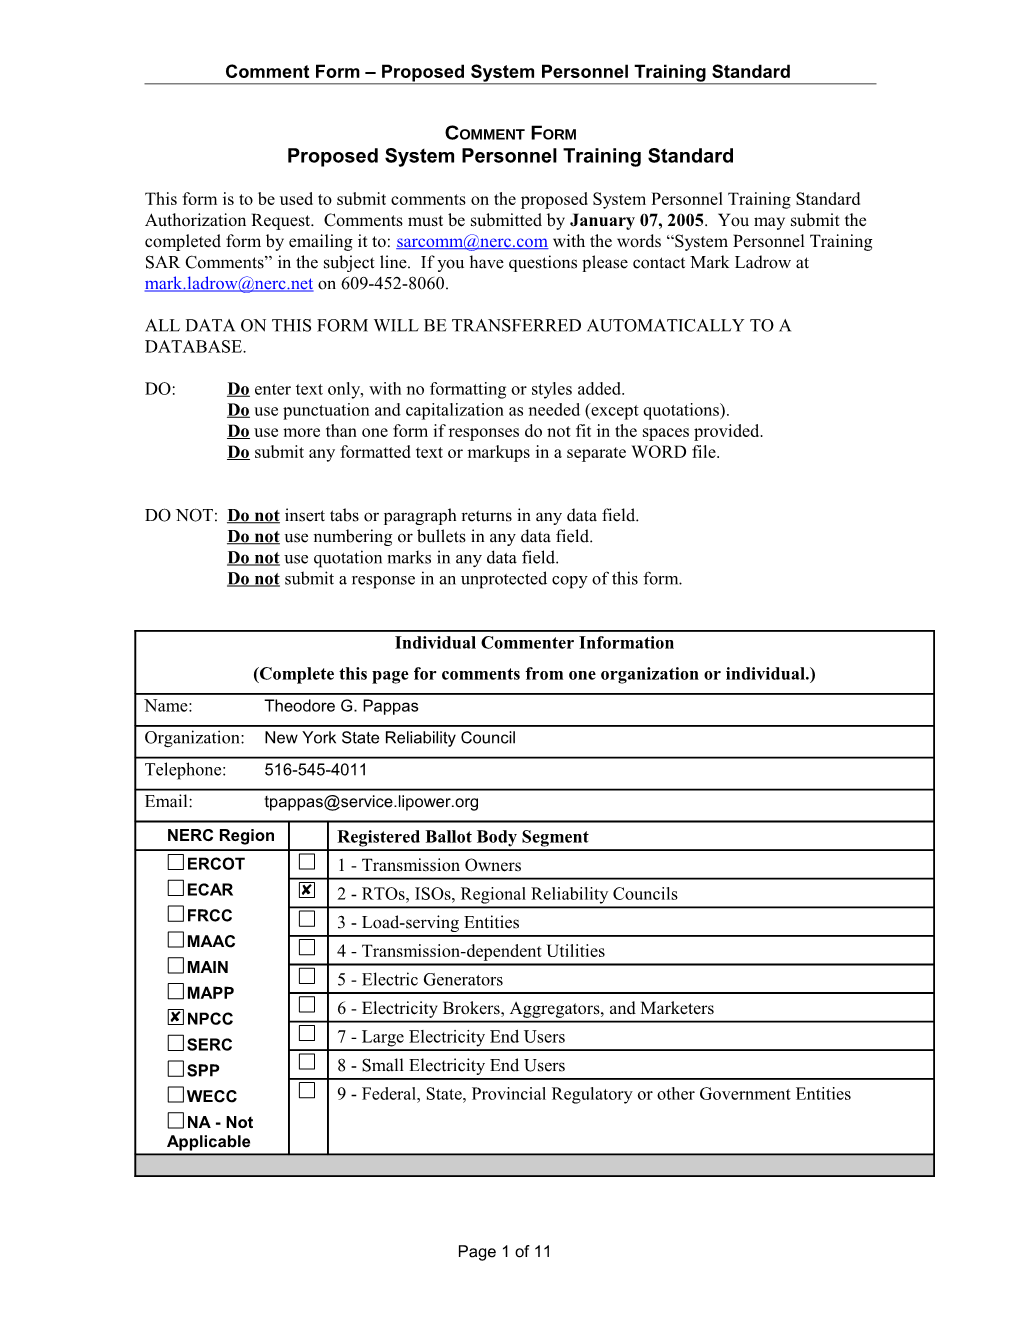 Comment Form Proposed System Personnel Training Standard